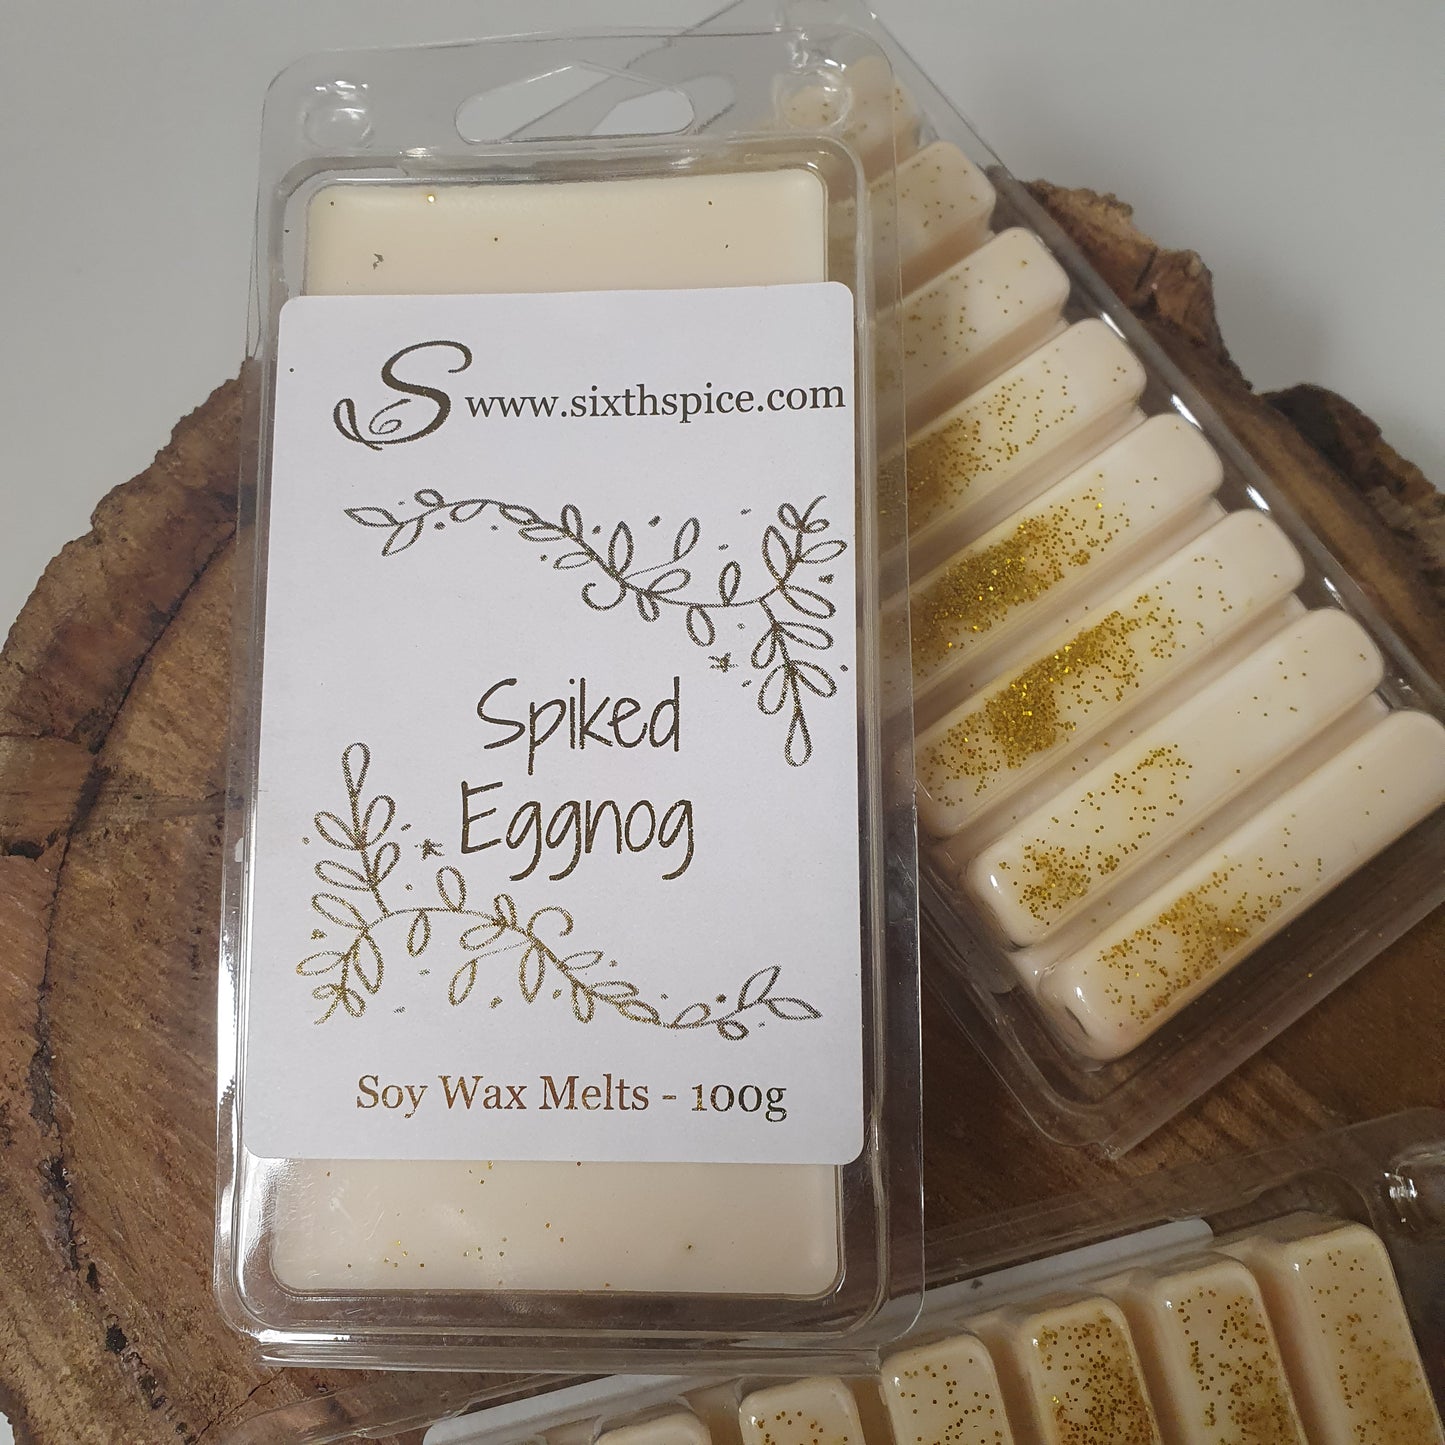 Spiked Eggnog - Soy Wax Melts